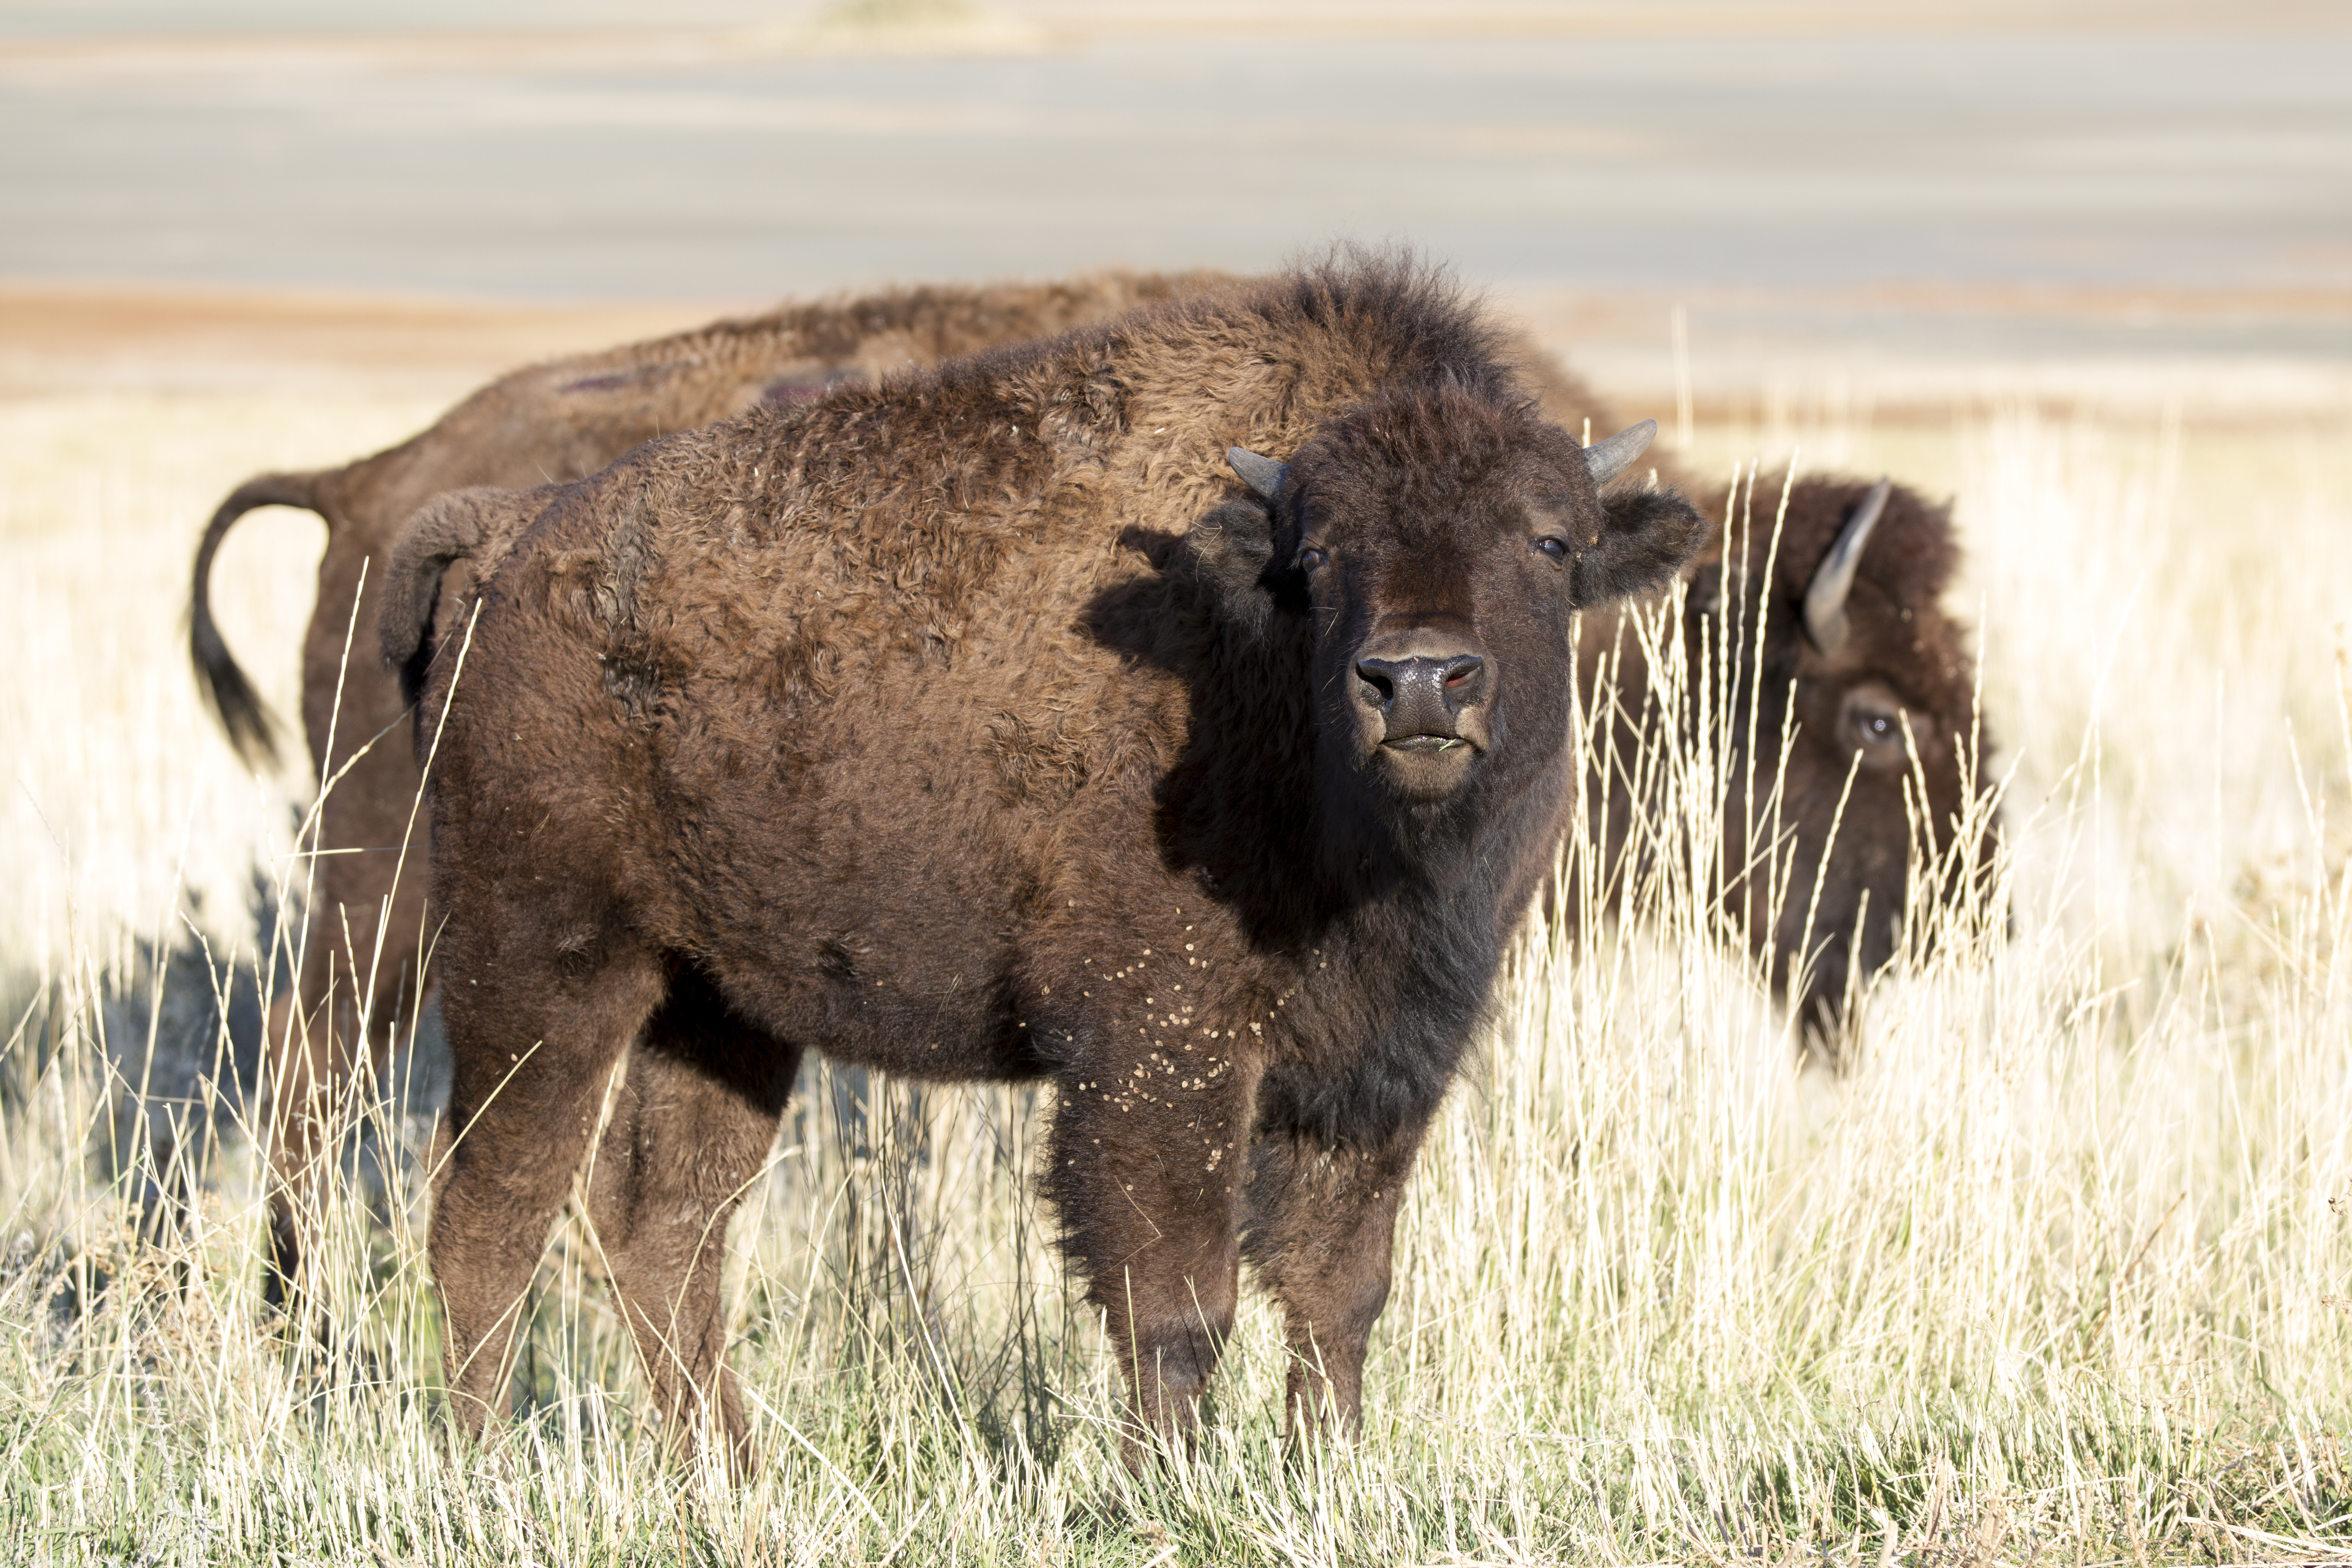 A young bison on Antelope Island